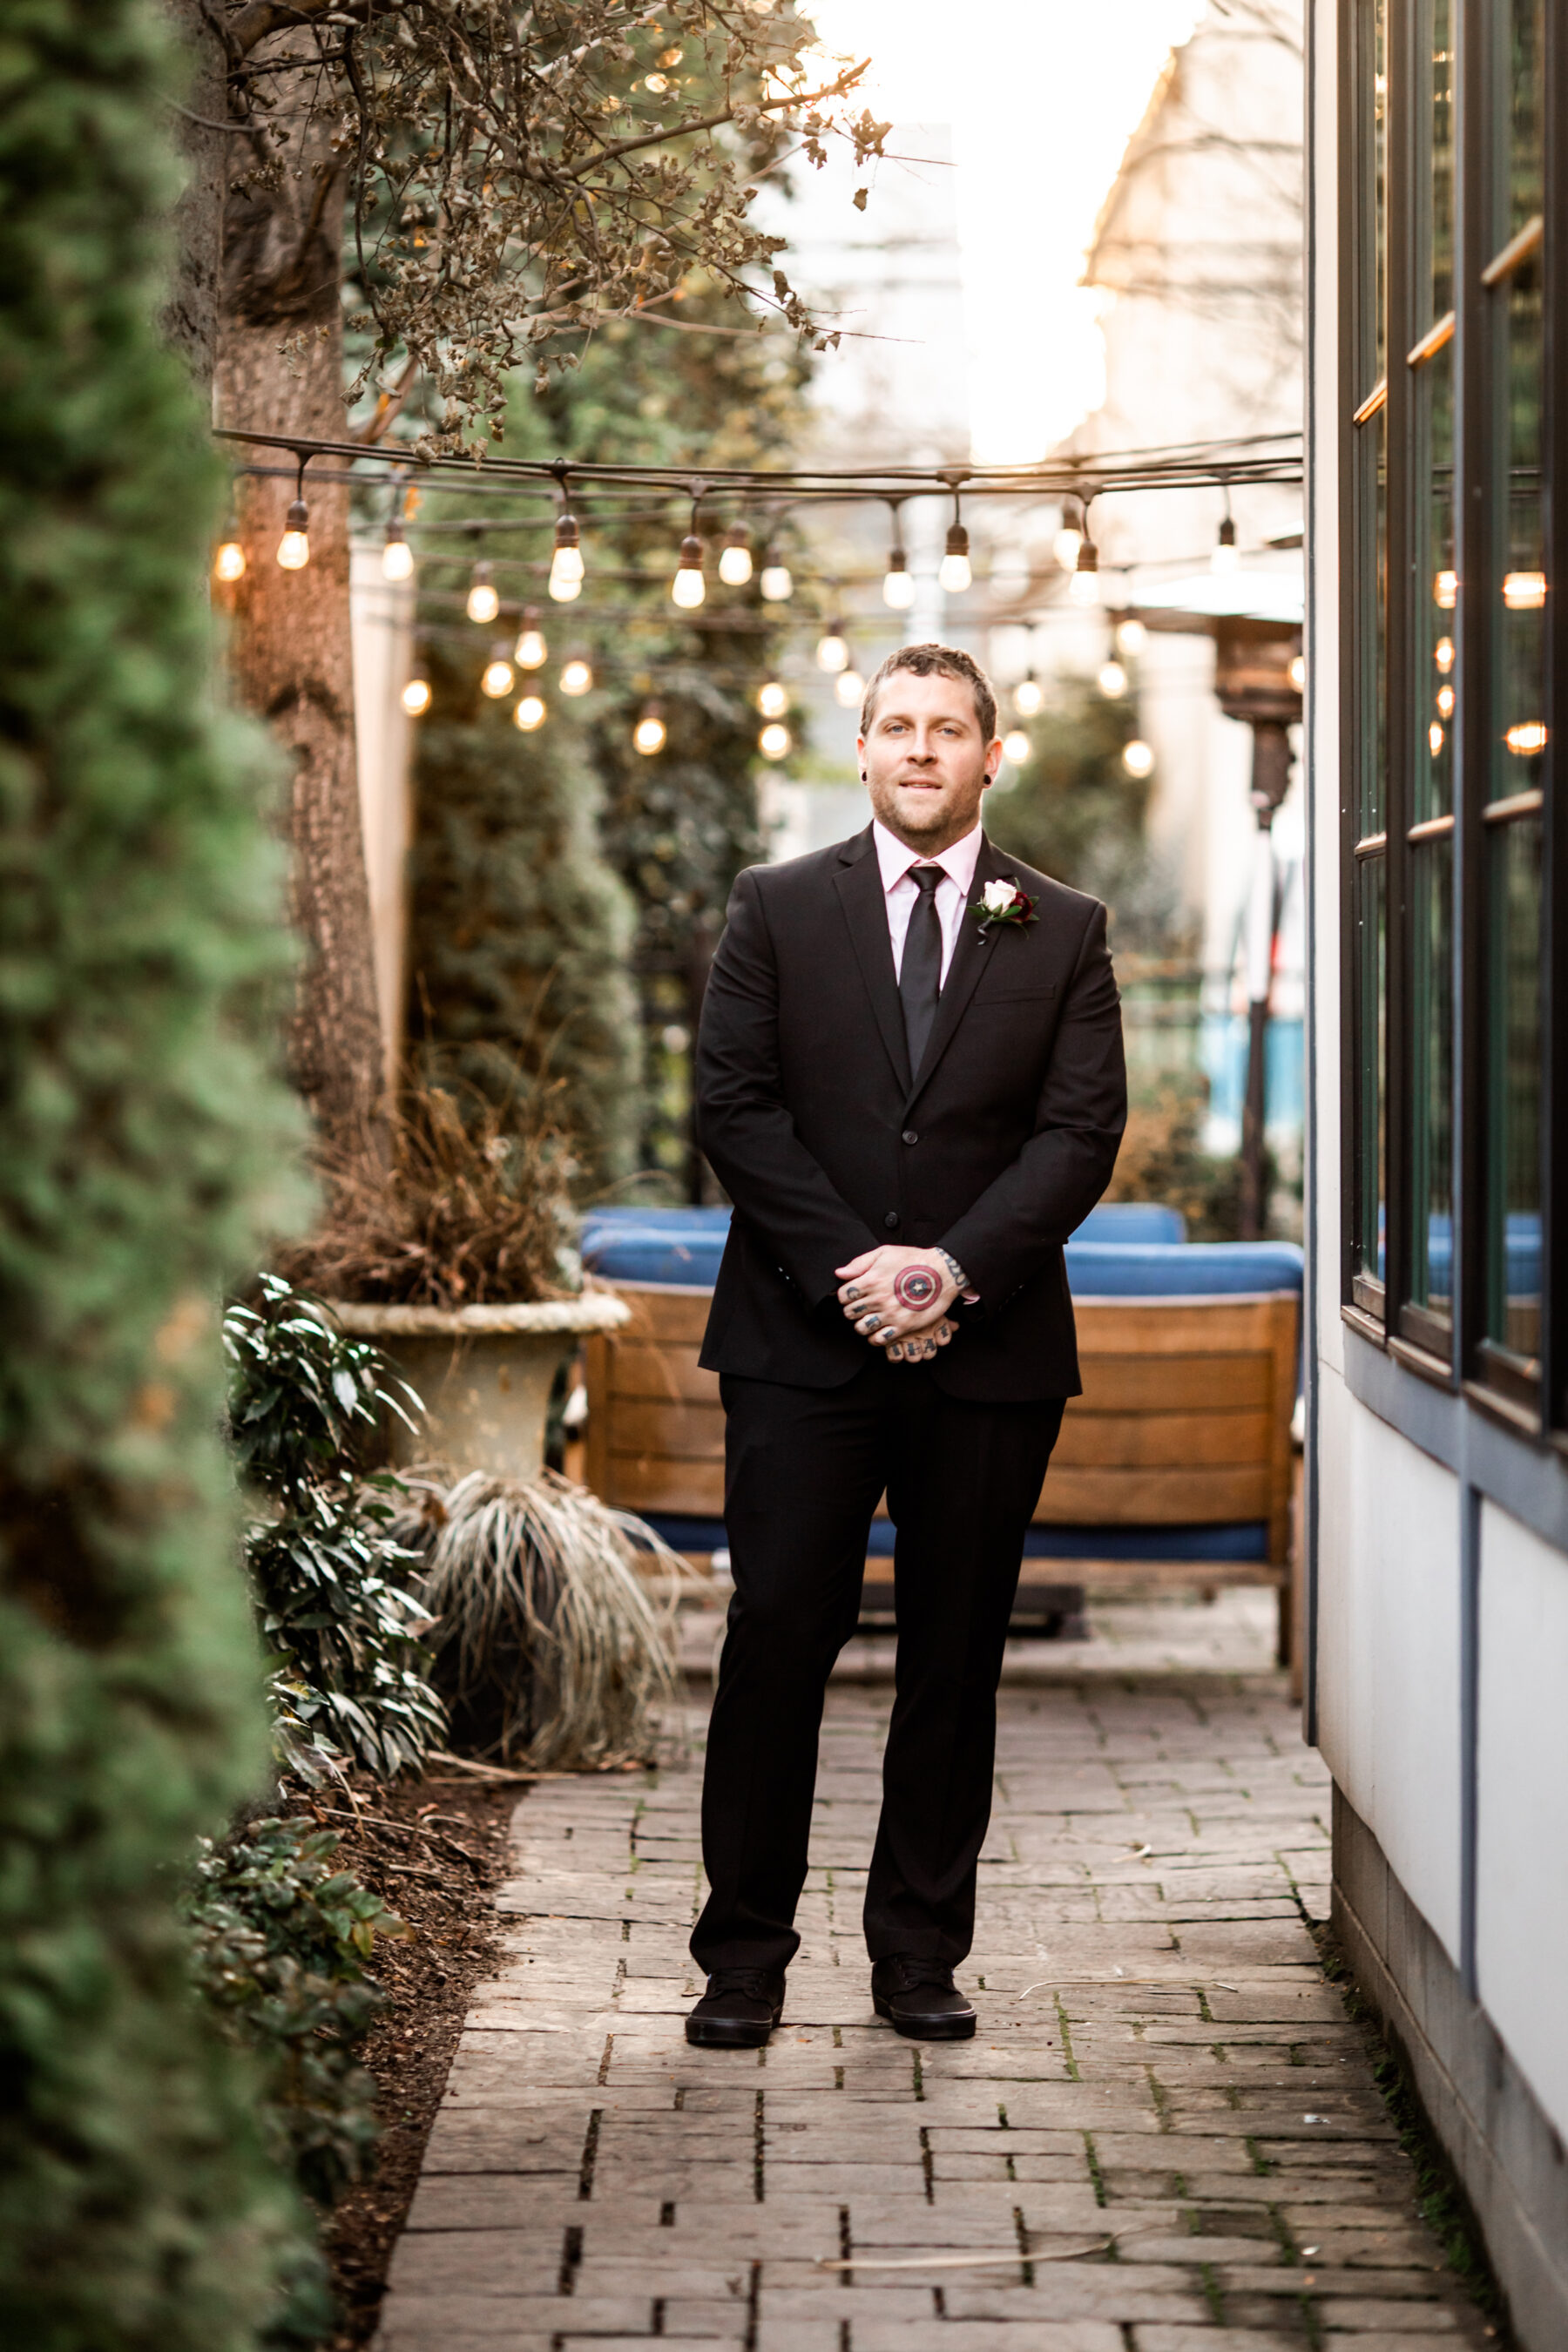 Grooms portrait: Nashville Wish Upon a Wedding captured by Nyk + Cali Photography featured on Nashville Bride Guide